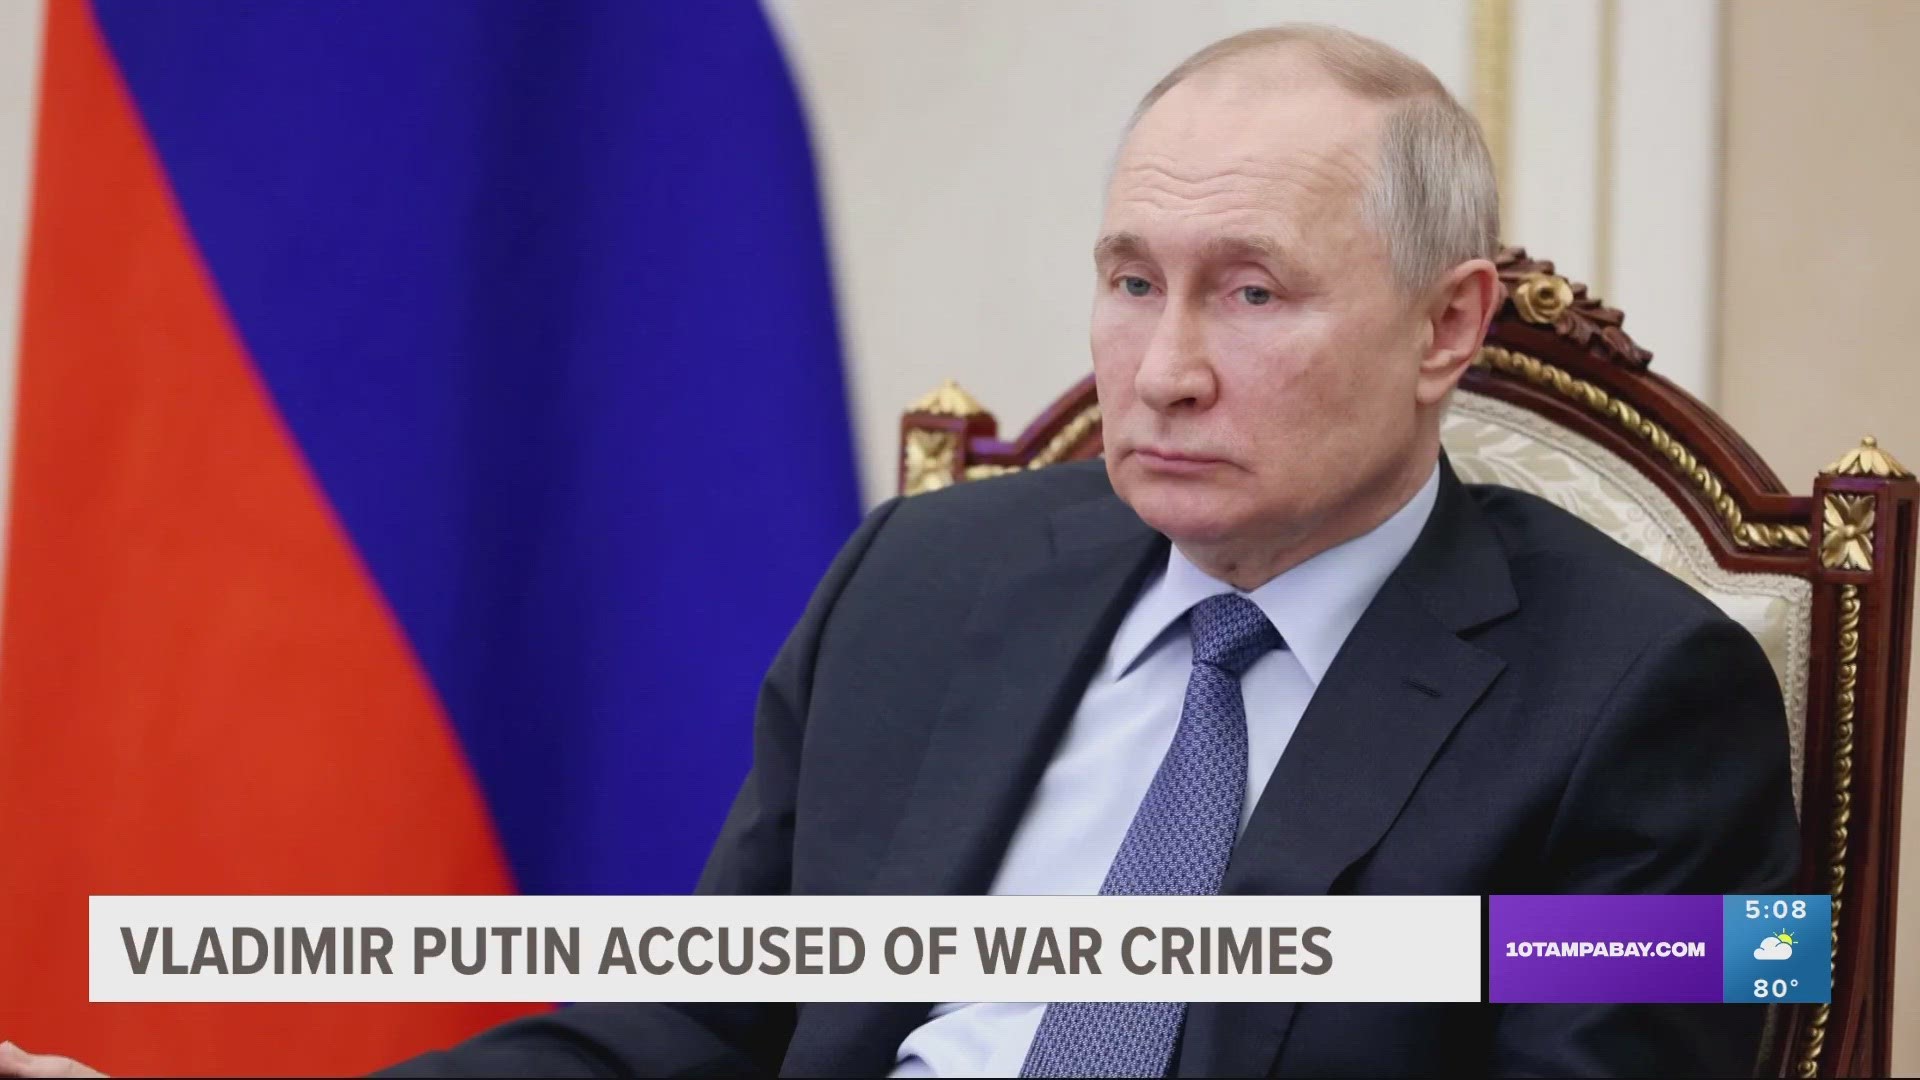 The court said in a statement that Putin “is allegedly responsible for the war crime of unlawful deportation" by abducting children from Ukraine to take to Russia.